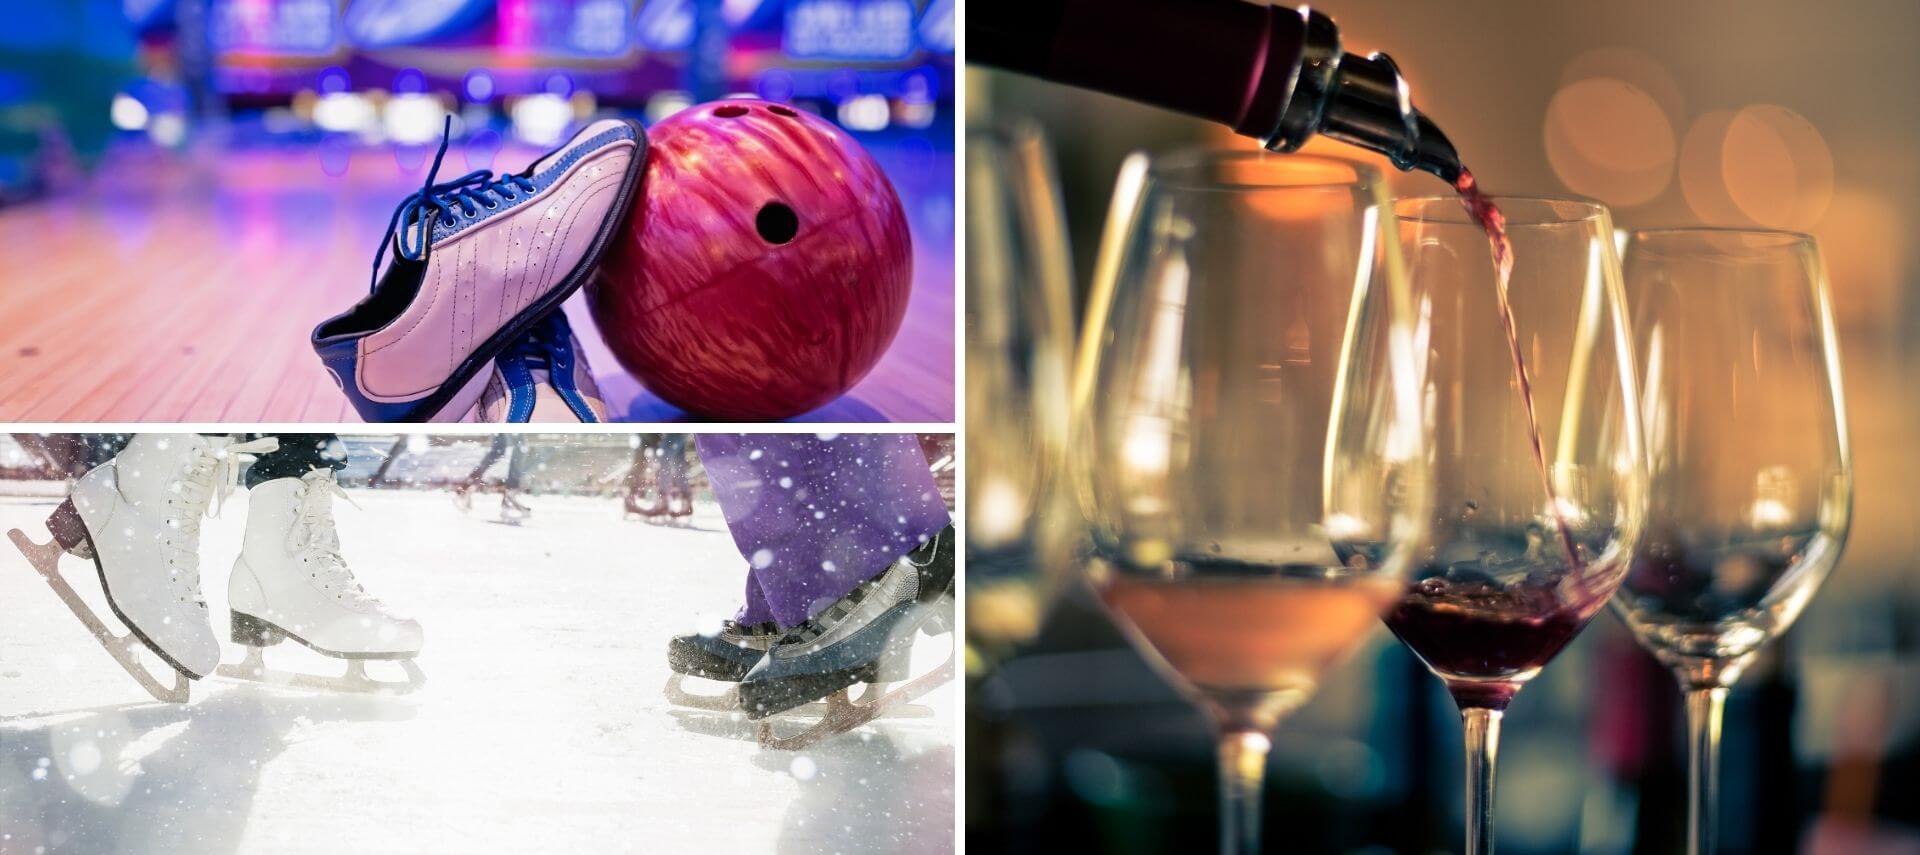 Date night ideas: of bowling alley focused on shoes and ball, pouring wine into goblets, couple ice skating